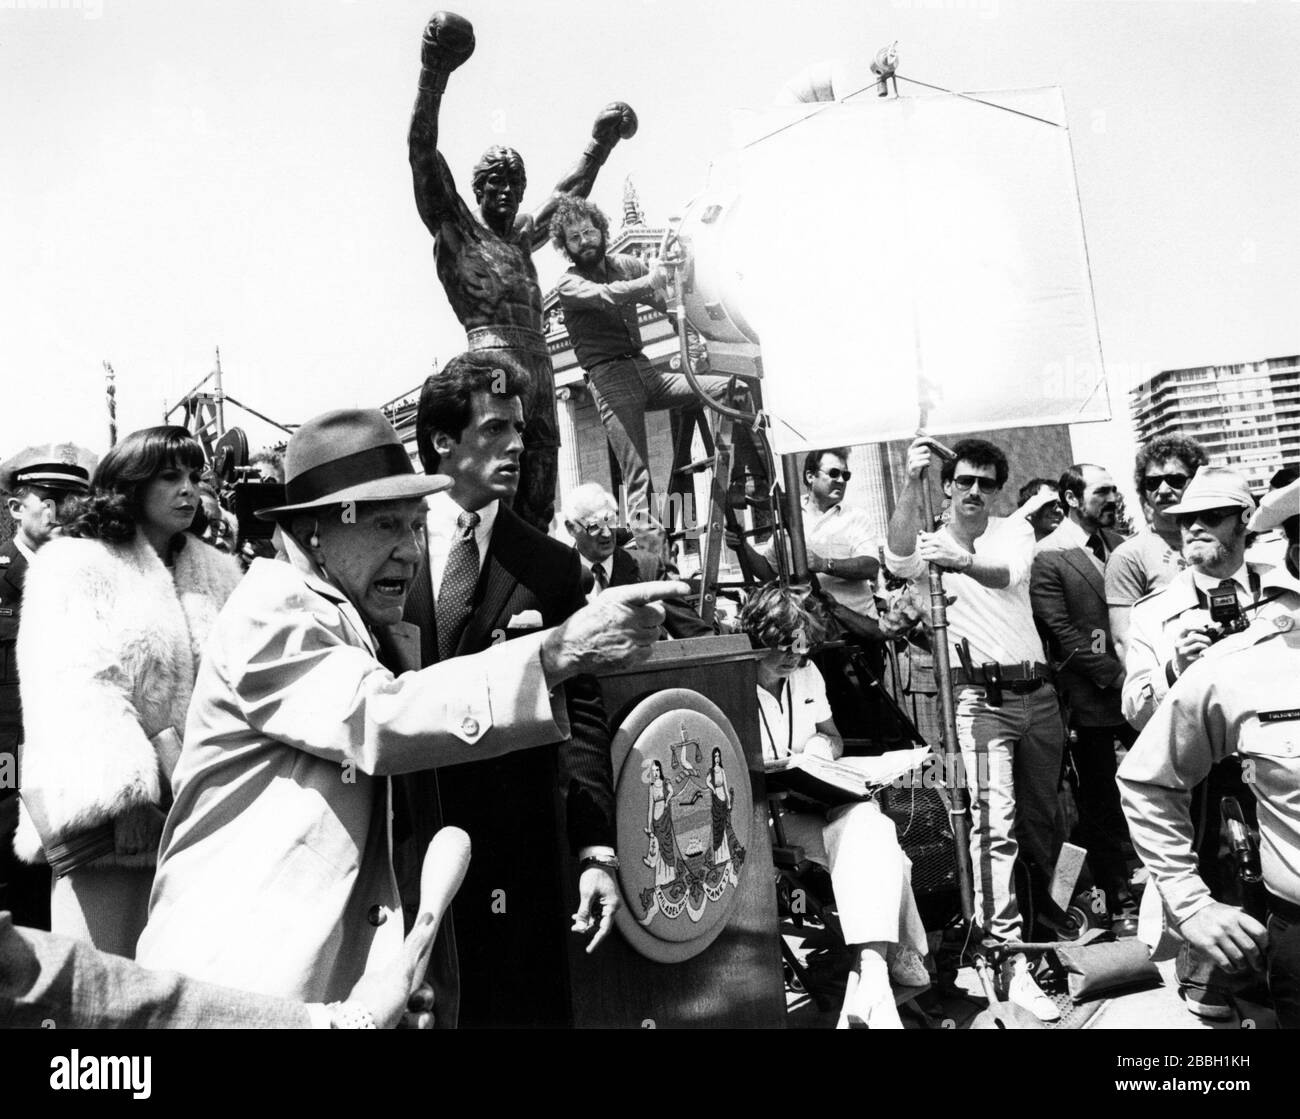 Photograph of Sylvester Stallone and Burgess Meredith filming Rocky III in Philadelphia, PA in 1982.Credit:  Scott Weiner / MediaPunch Photograph of the Premiere of Rocky II at the Philadelphia Museum of Art in Philadelphia, PA in 1979. Stock Photo